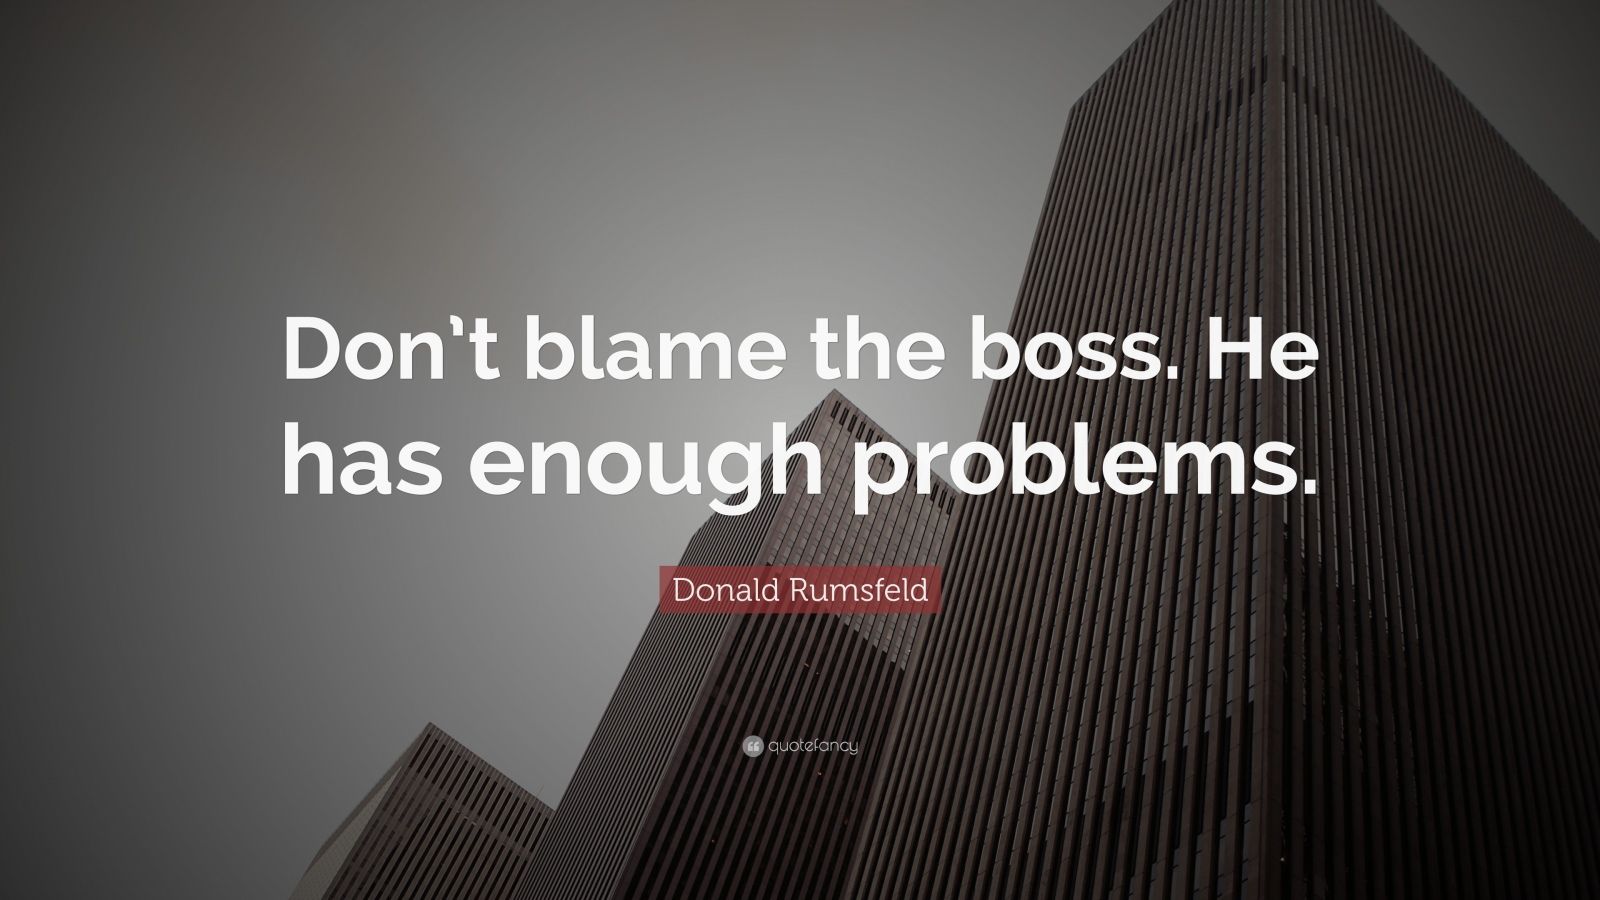 Boss Quotes (40 wallpapers) - Quotefancy